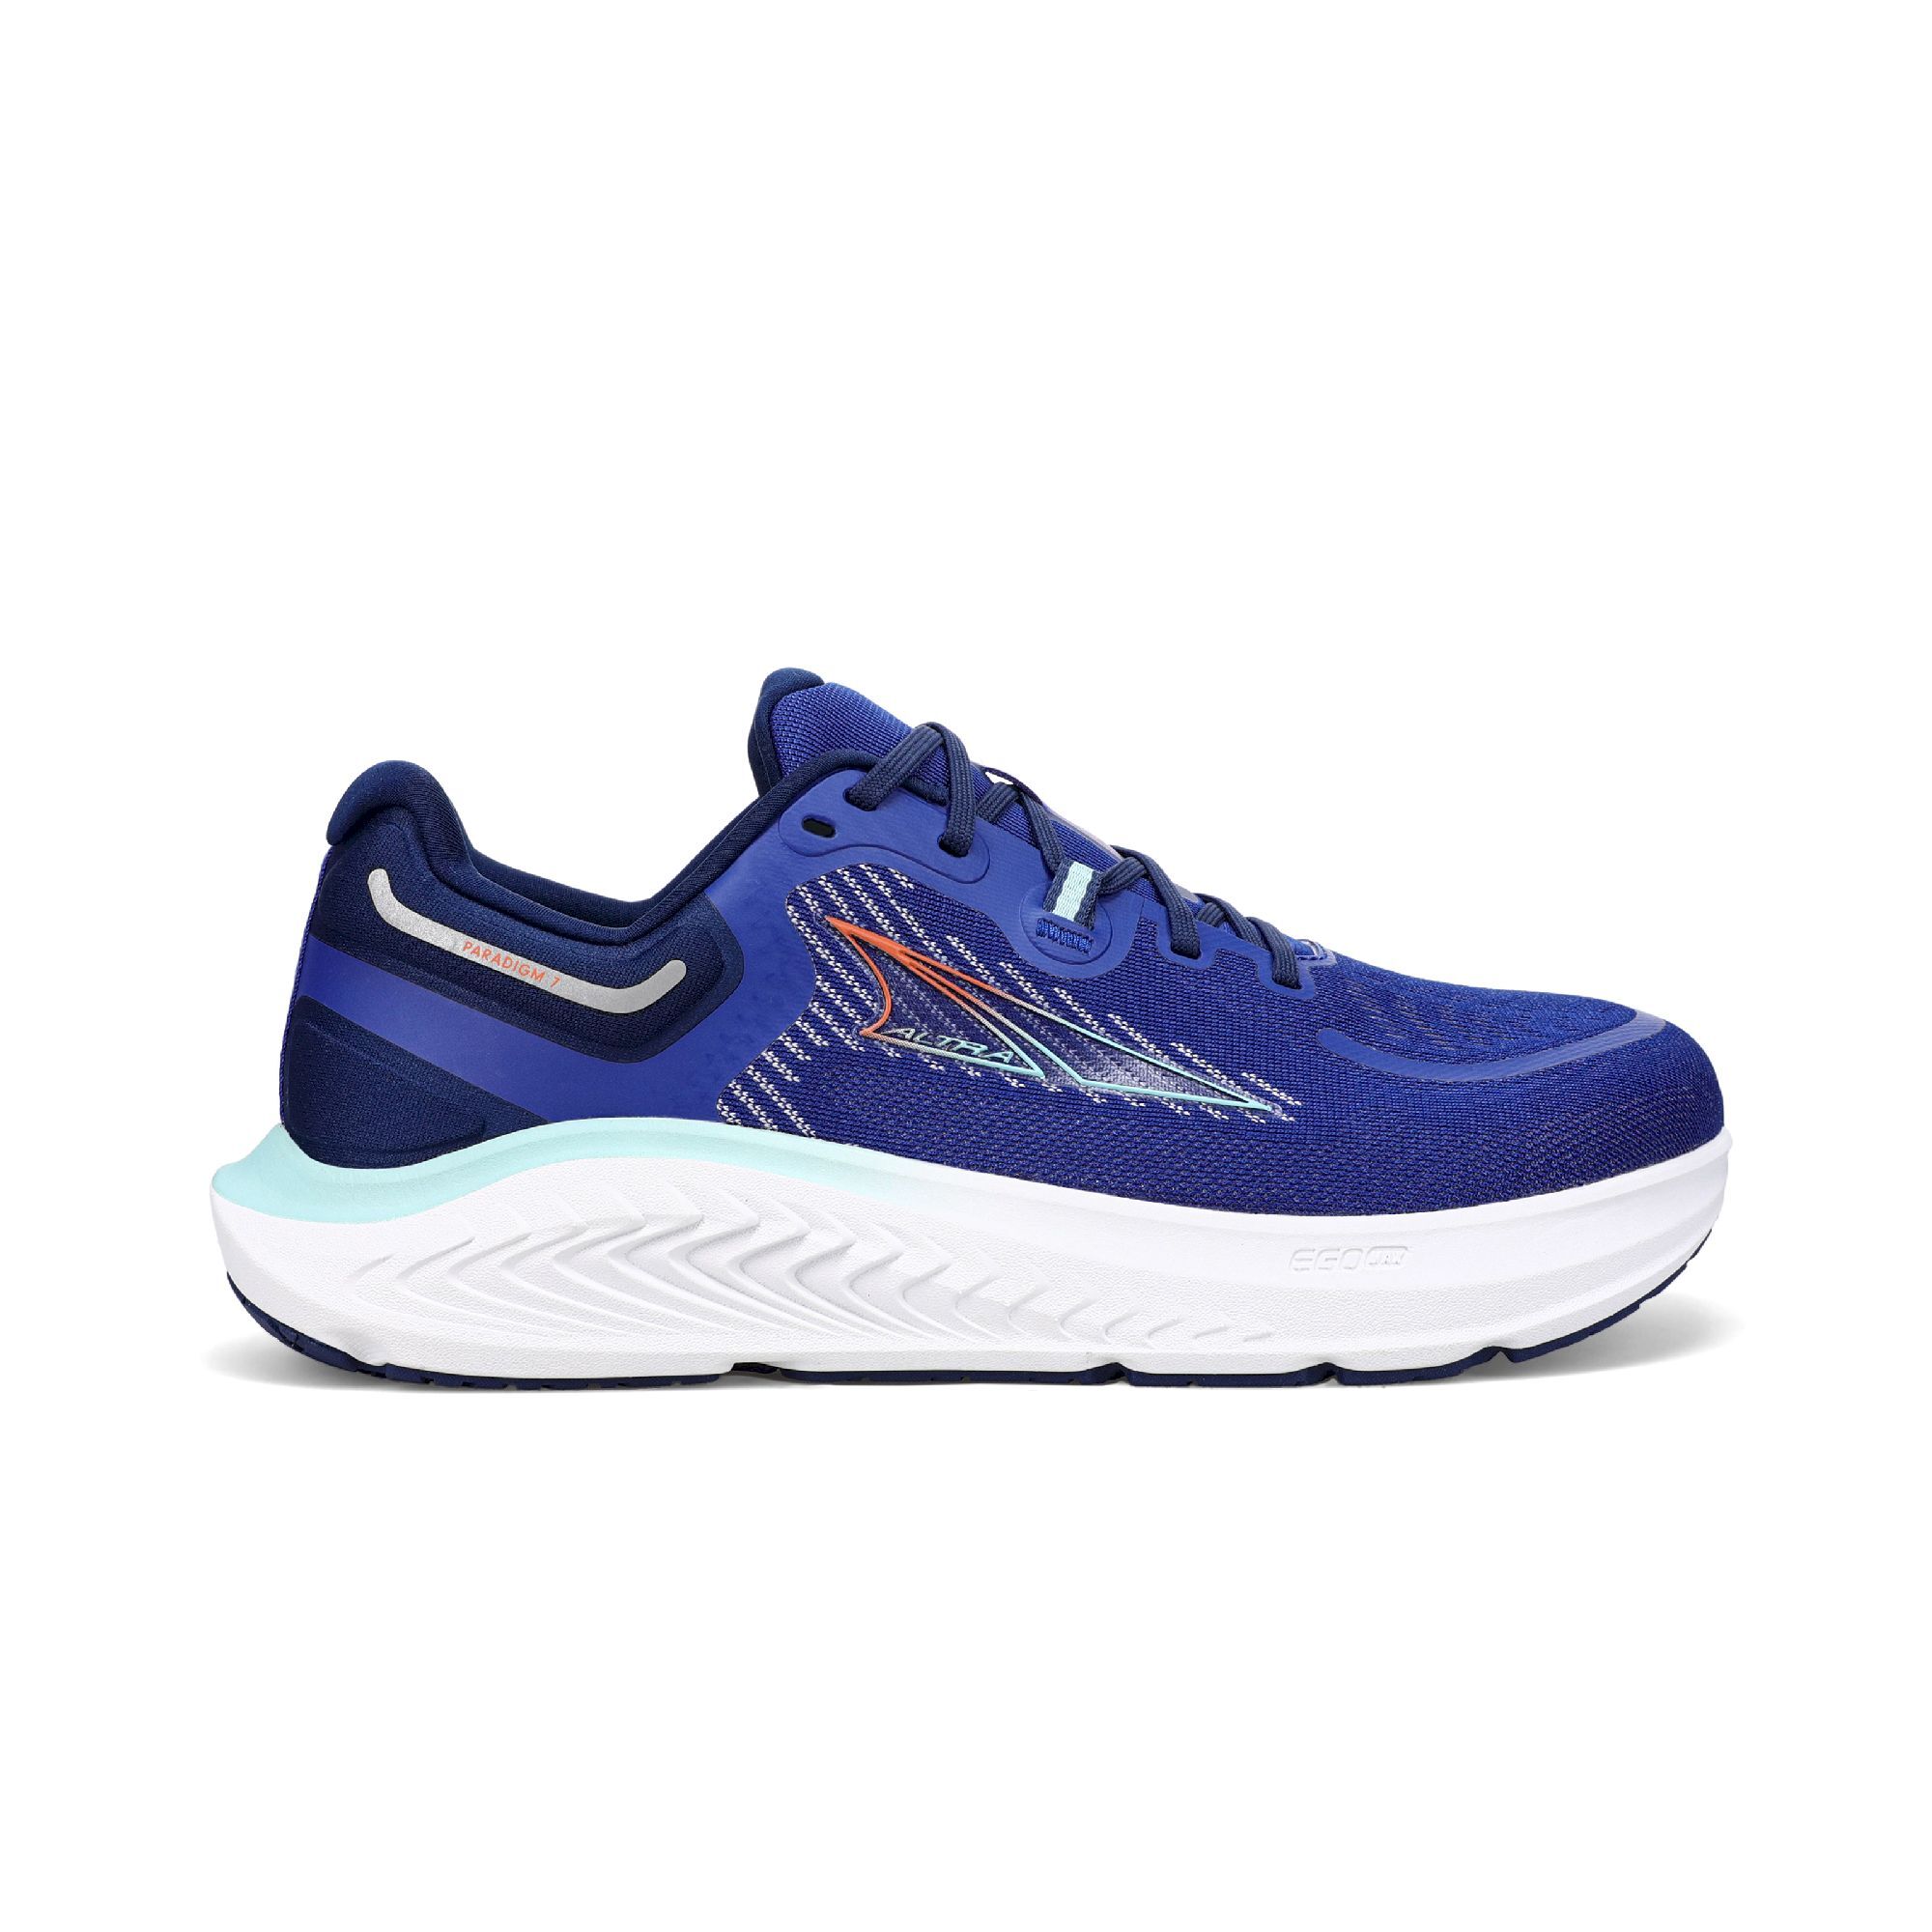 Altra Paradigm 7 Wide - Chaussures running homme | Hardloop